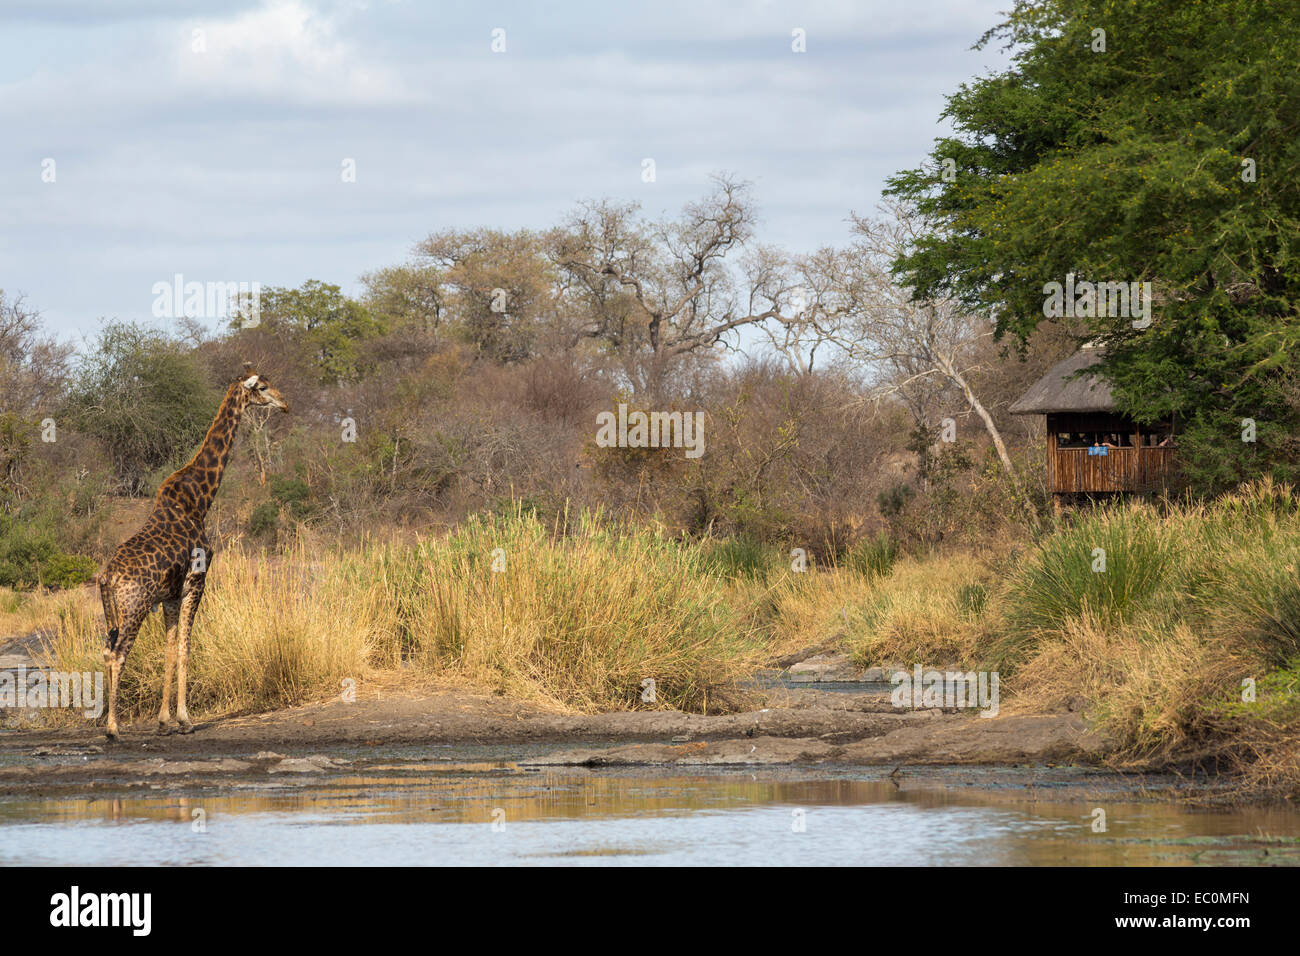 Sweni wildlife viewing hide, Kruger national park, South Africa Stock Photo